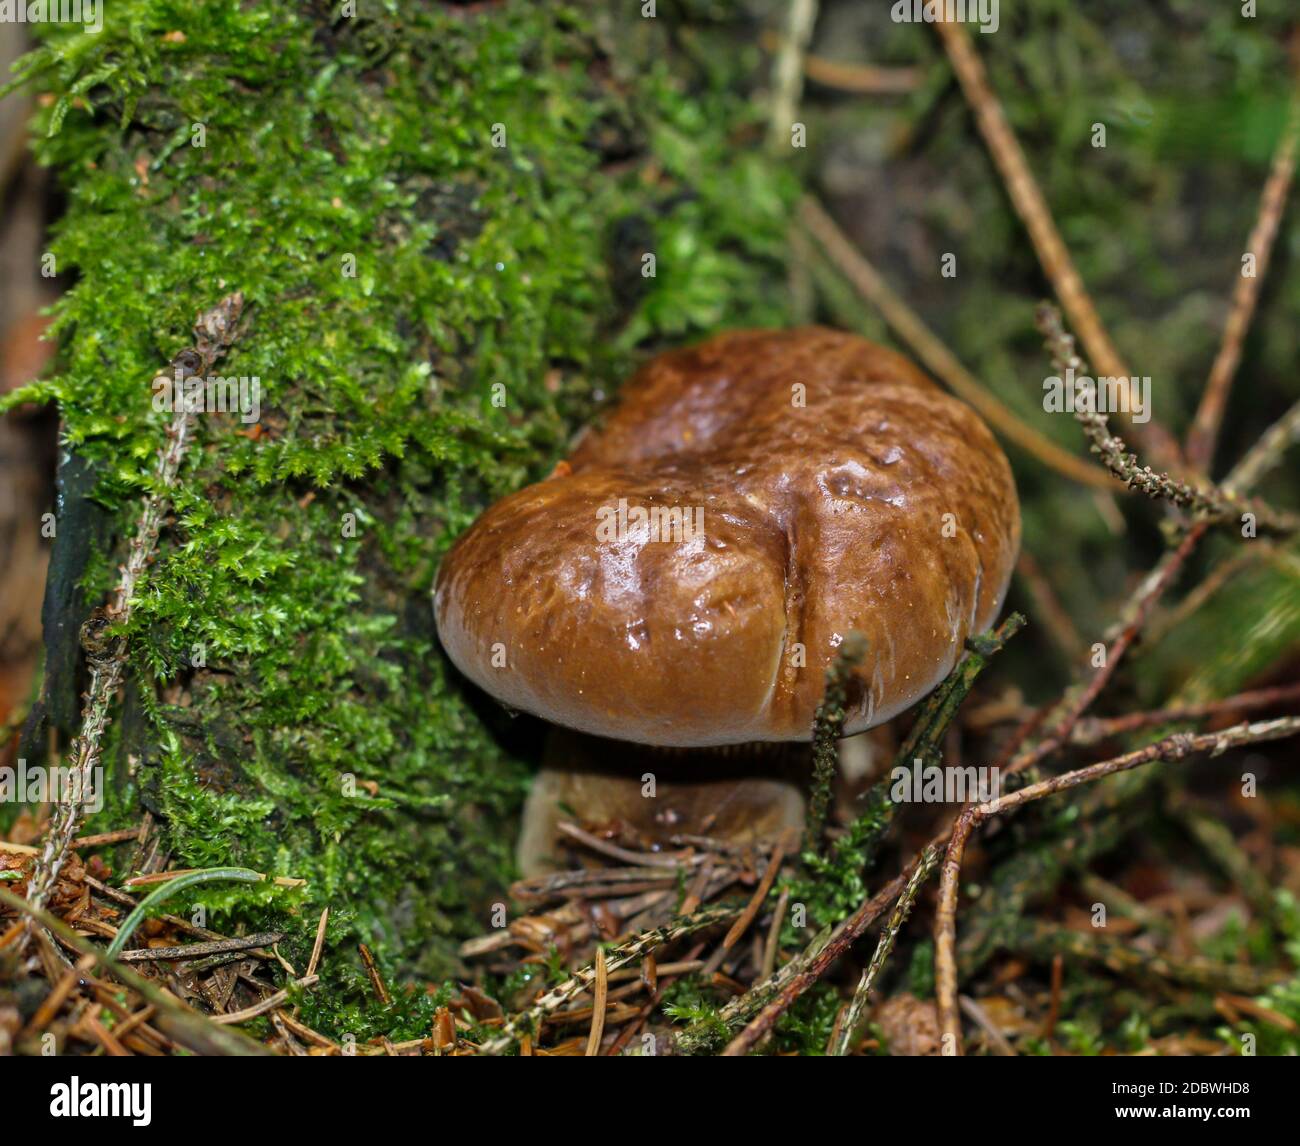 Close-up of a mushroom poking through the ground in the forest